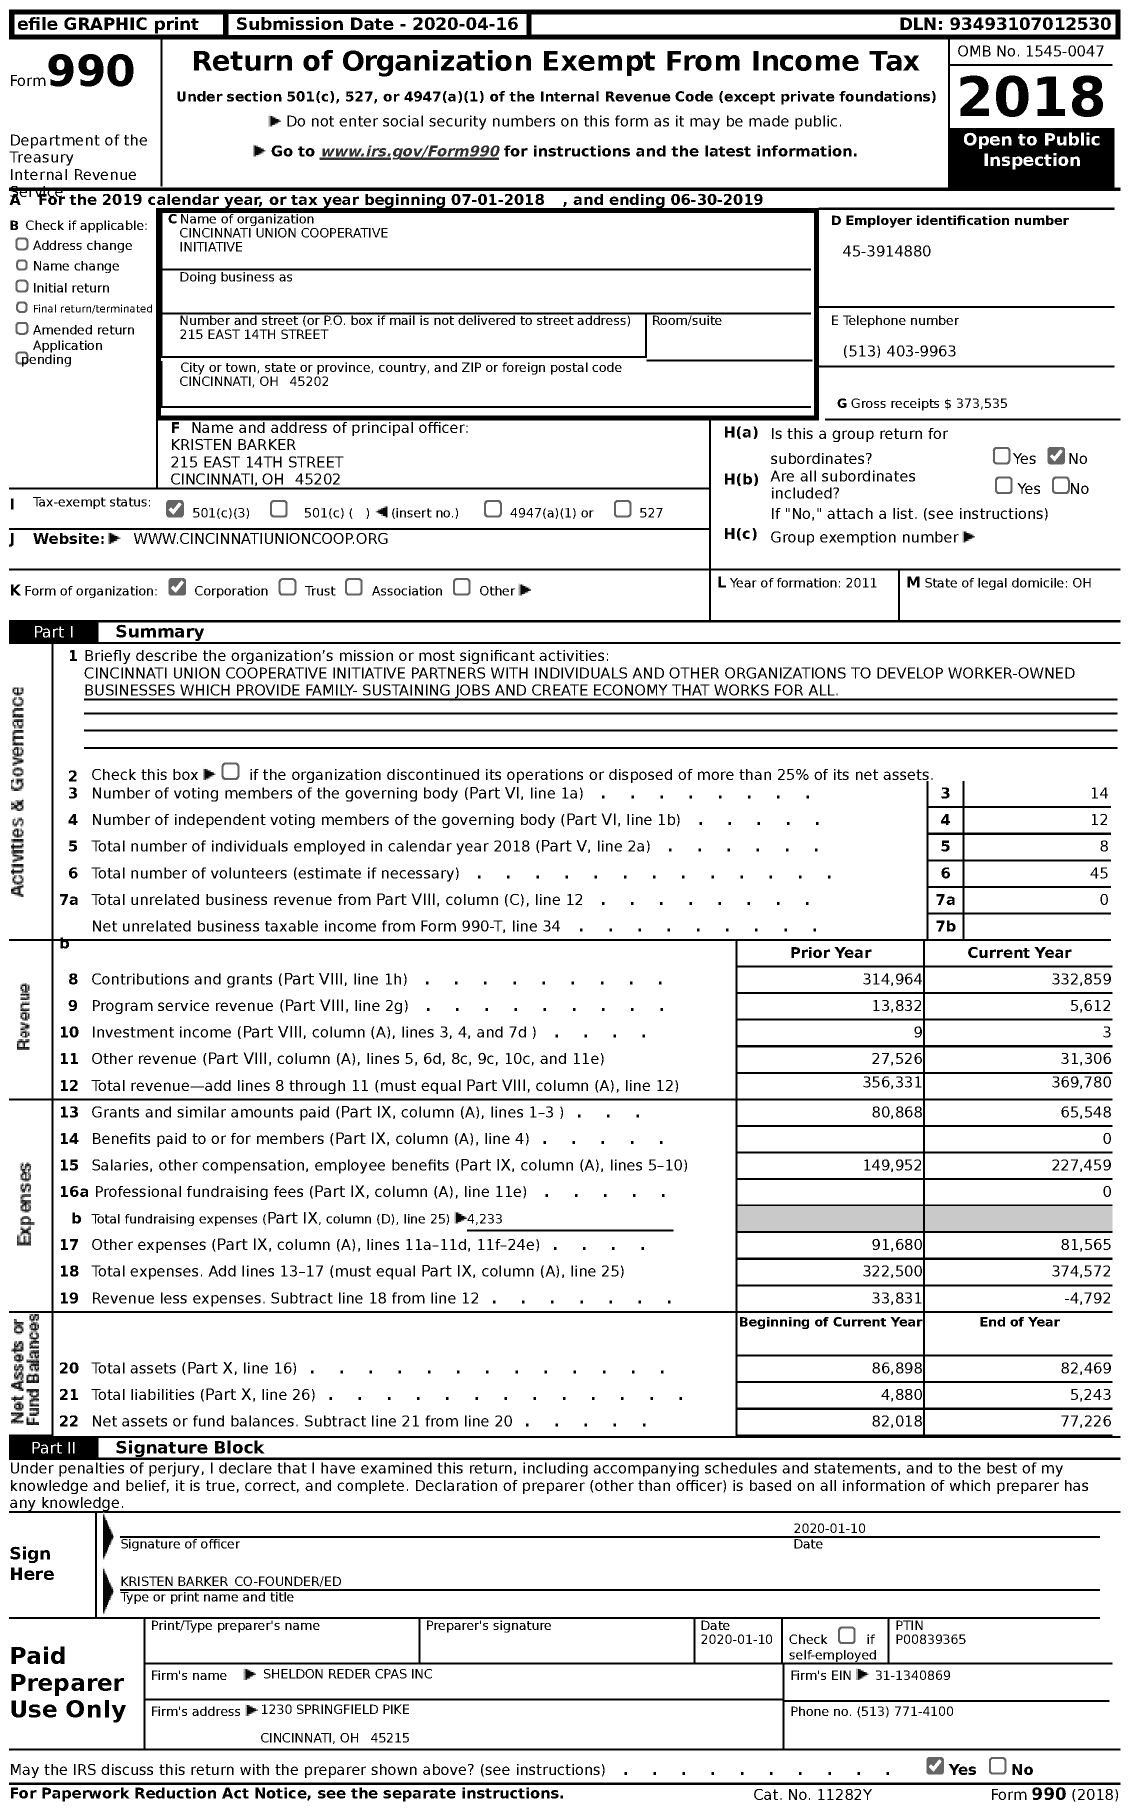 Image of first page of 2018 Form 990 for Cincinnati Union Cooperative Initiative